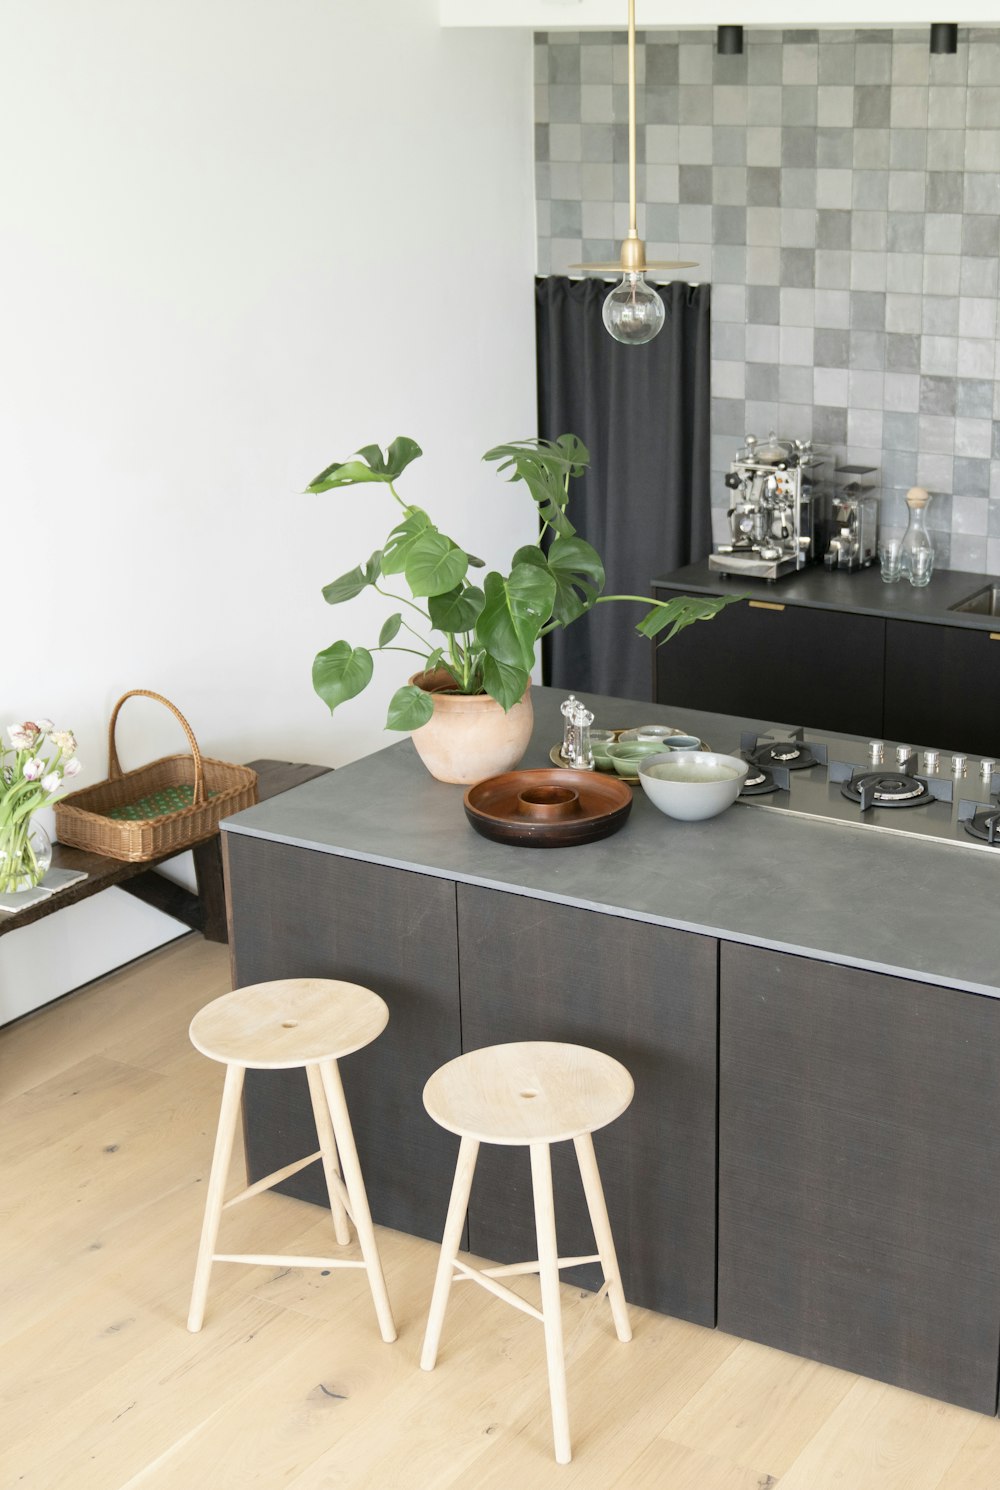 a kitchen with a counter, stools and a potted plant